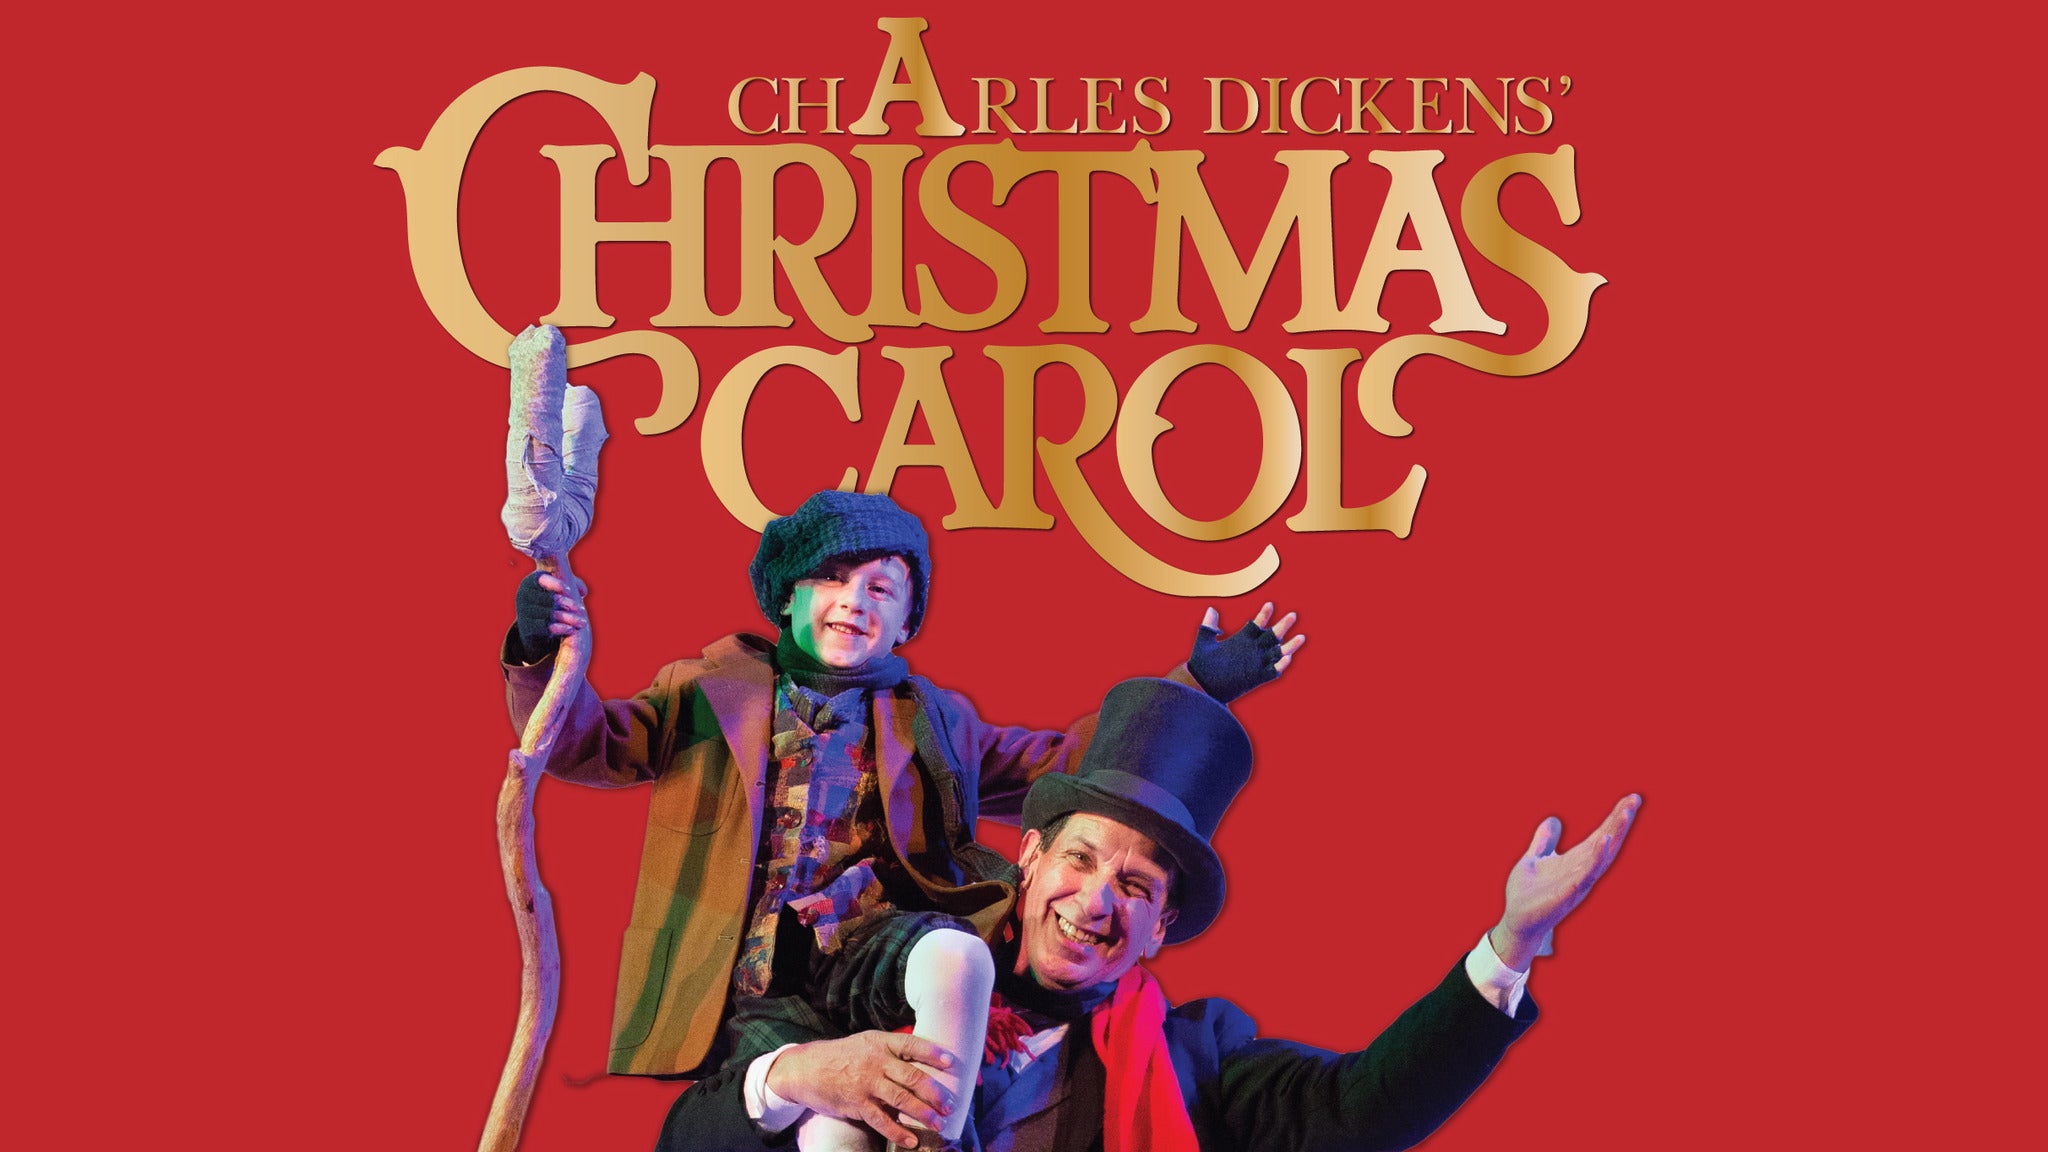 Image result for Charles Dickens’ A Christmas Carol walnut street theatre